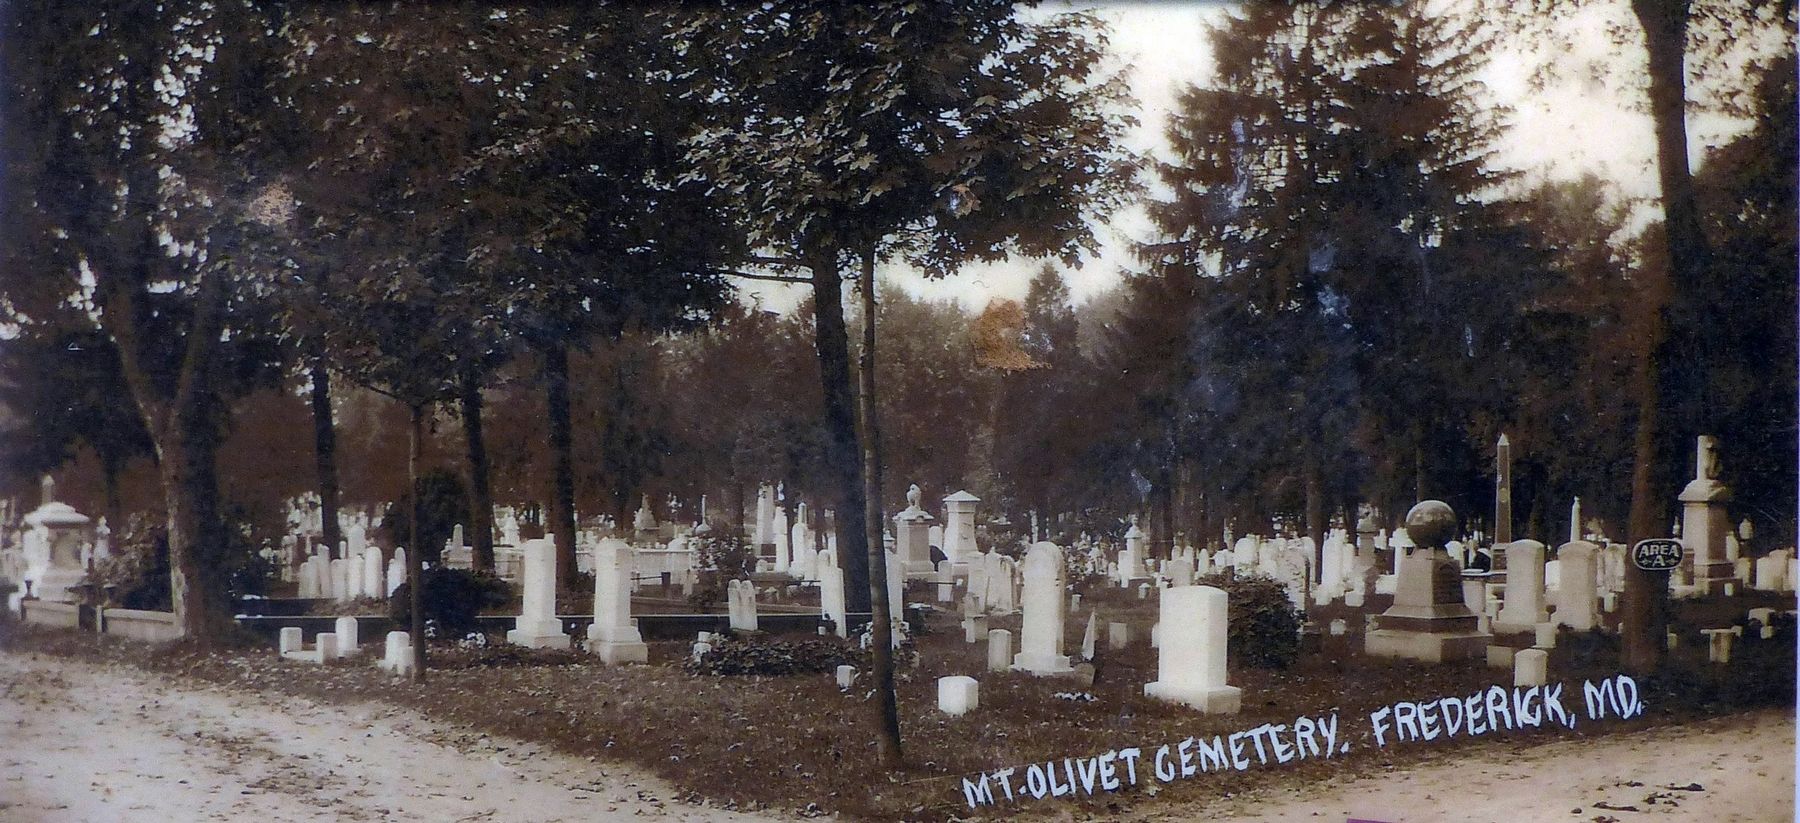 Mount Olivet Cemetery, Frederick, MD. image. Click for full size.